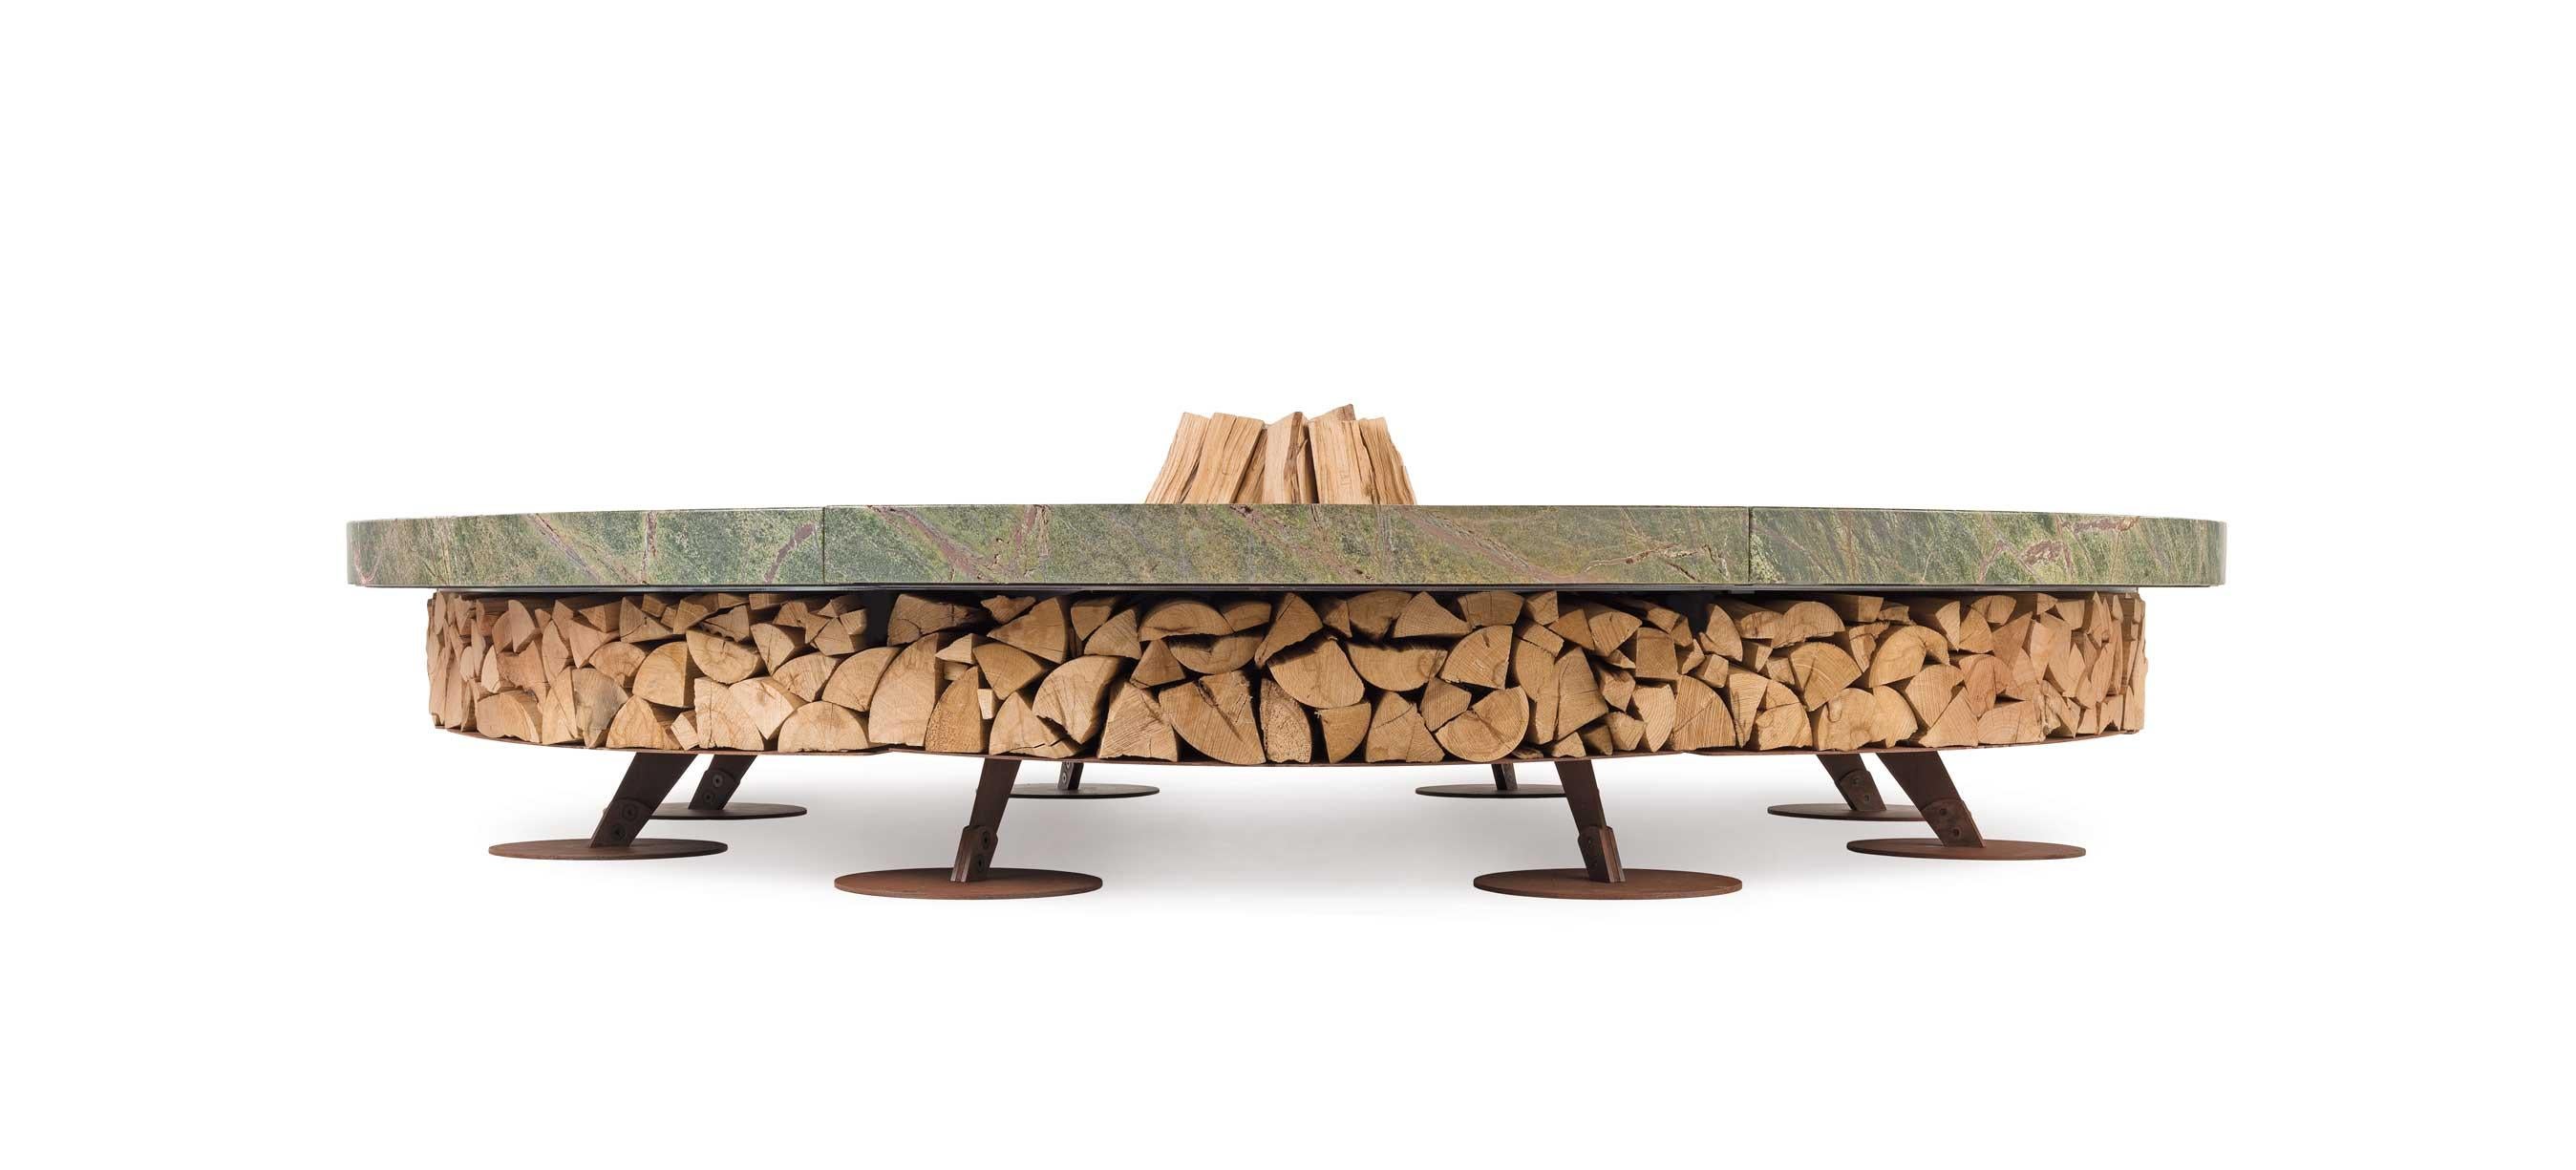 Ercole large Rain Forest green marble fire pit by AK47 Design

Rain Forest green marble fire pit Ø2500 mm.
Ercole is a outdoor wood-burning fire pit.
It is born by the union of two raw materials – the steel as a structural element and the marble